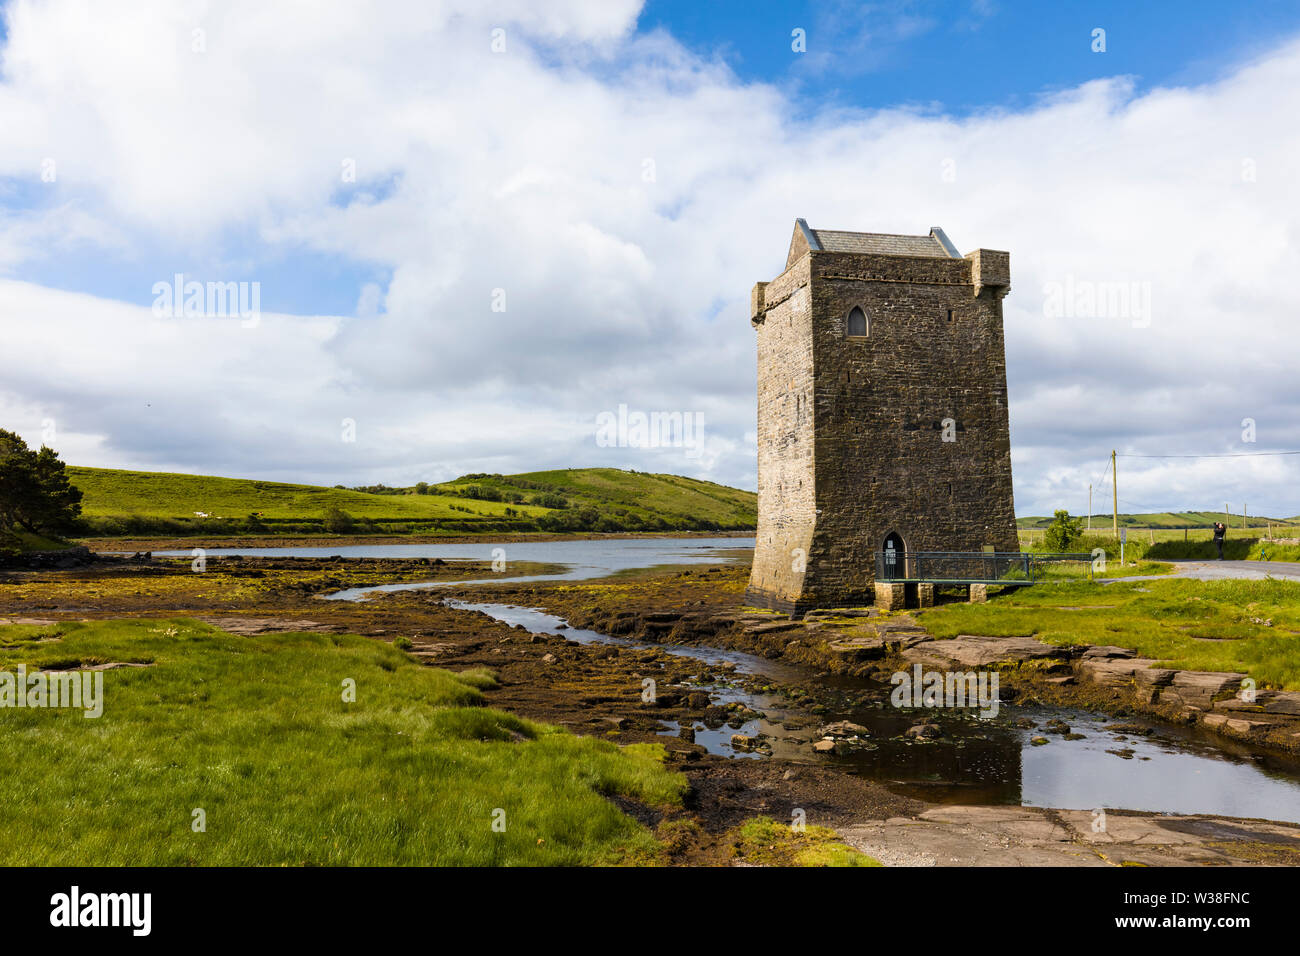 Rockfleet Castle, or Carrickahowley Castle a tower house of Grace O'Malley the pirate queen near Newport in County Mayo, Ireland Stock Photo